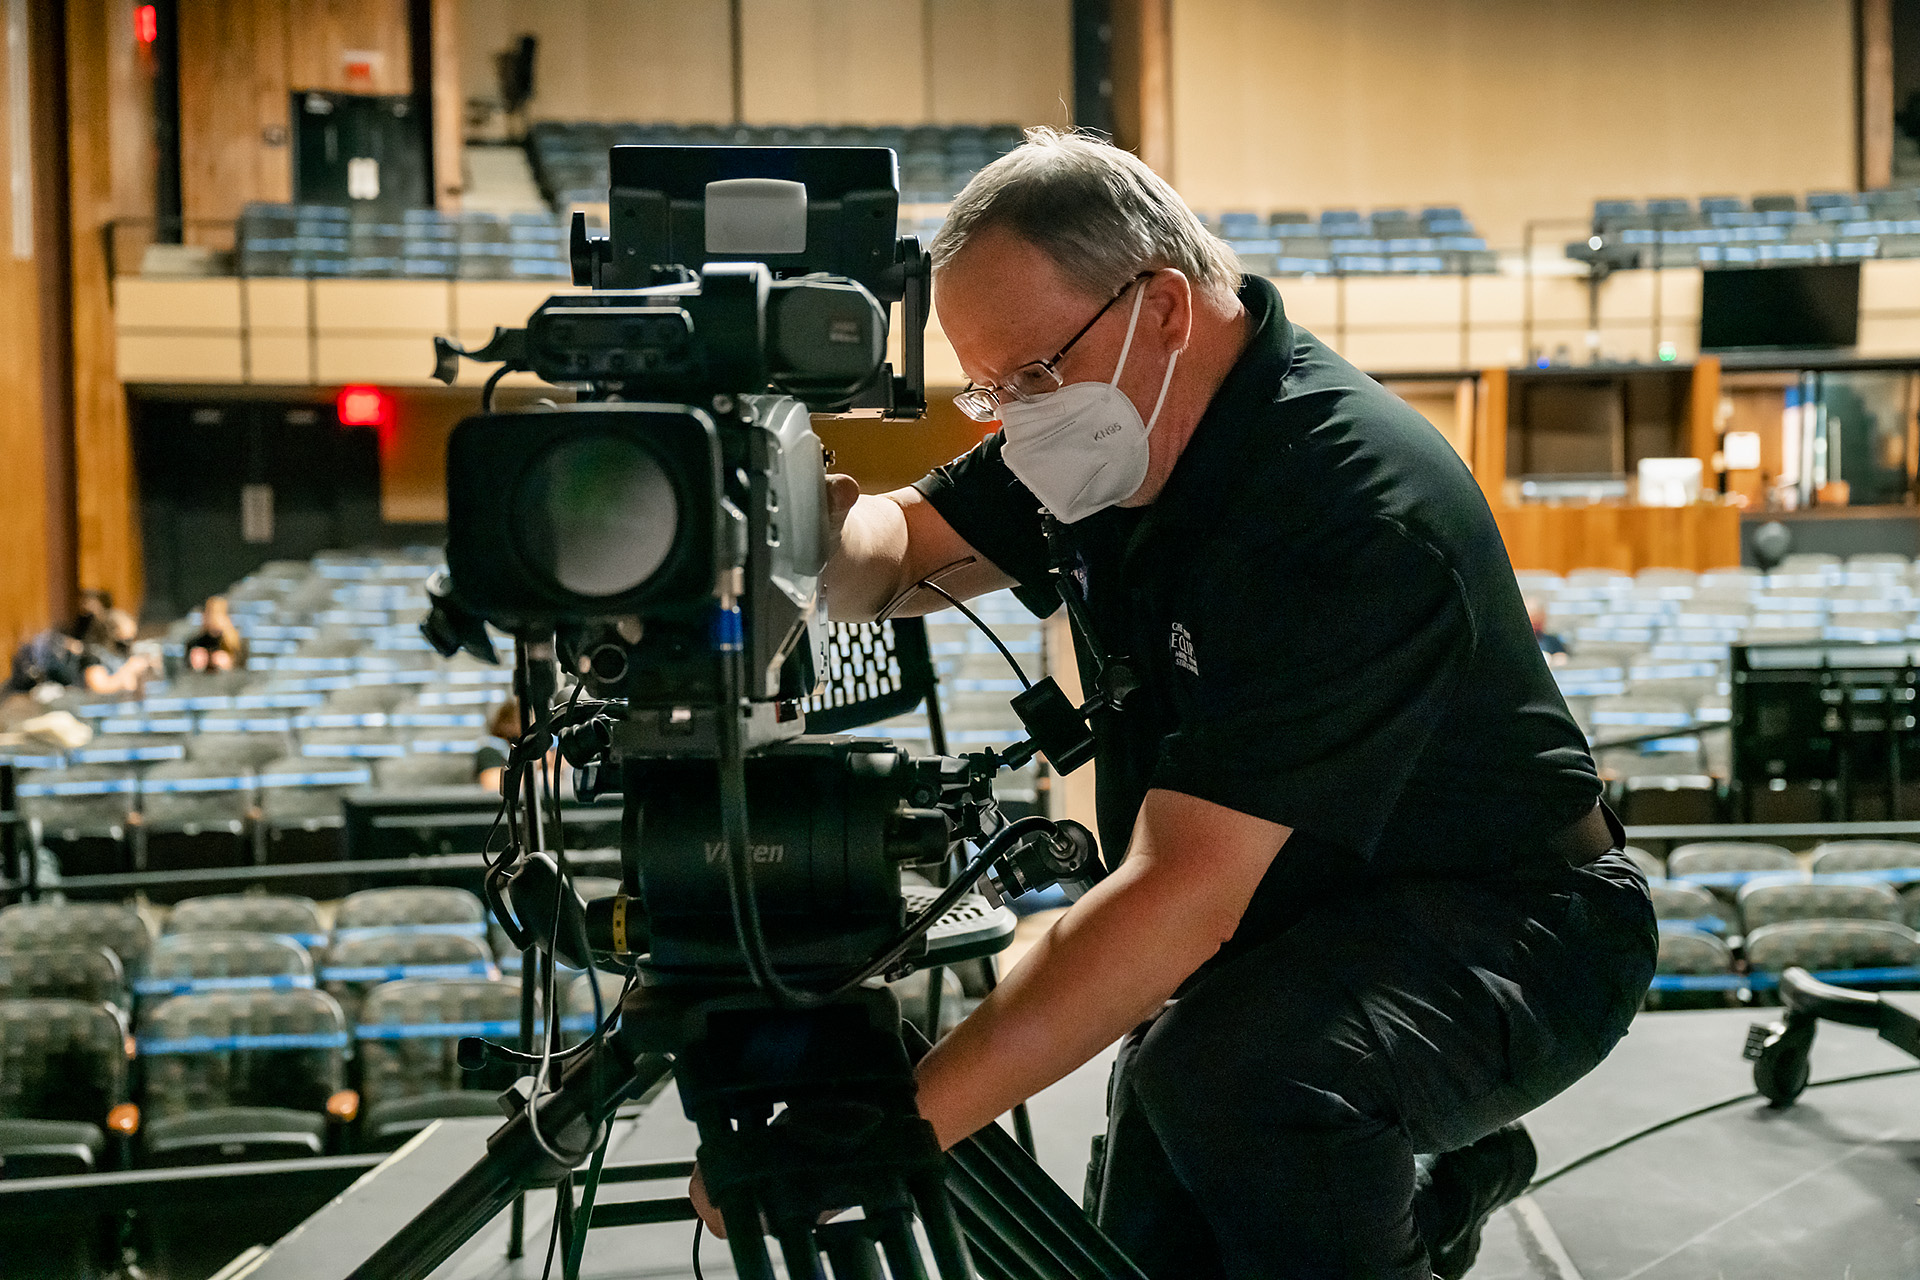 MTSU Department of Media Arts professor Robert "Bob" Gordon Jr. checks a camera placement while working with students in Tucker Theatre to record the MTSU Dance Theatre's 2020 Fall Dance Concert for broadcast Saturday, Nov. 21. (MTSU photo by Andy Heidt)